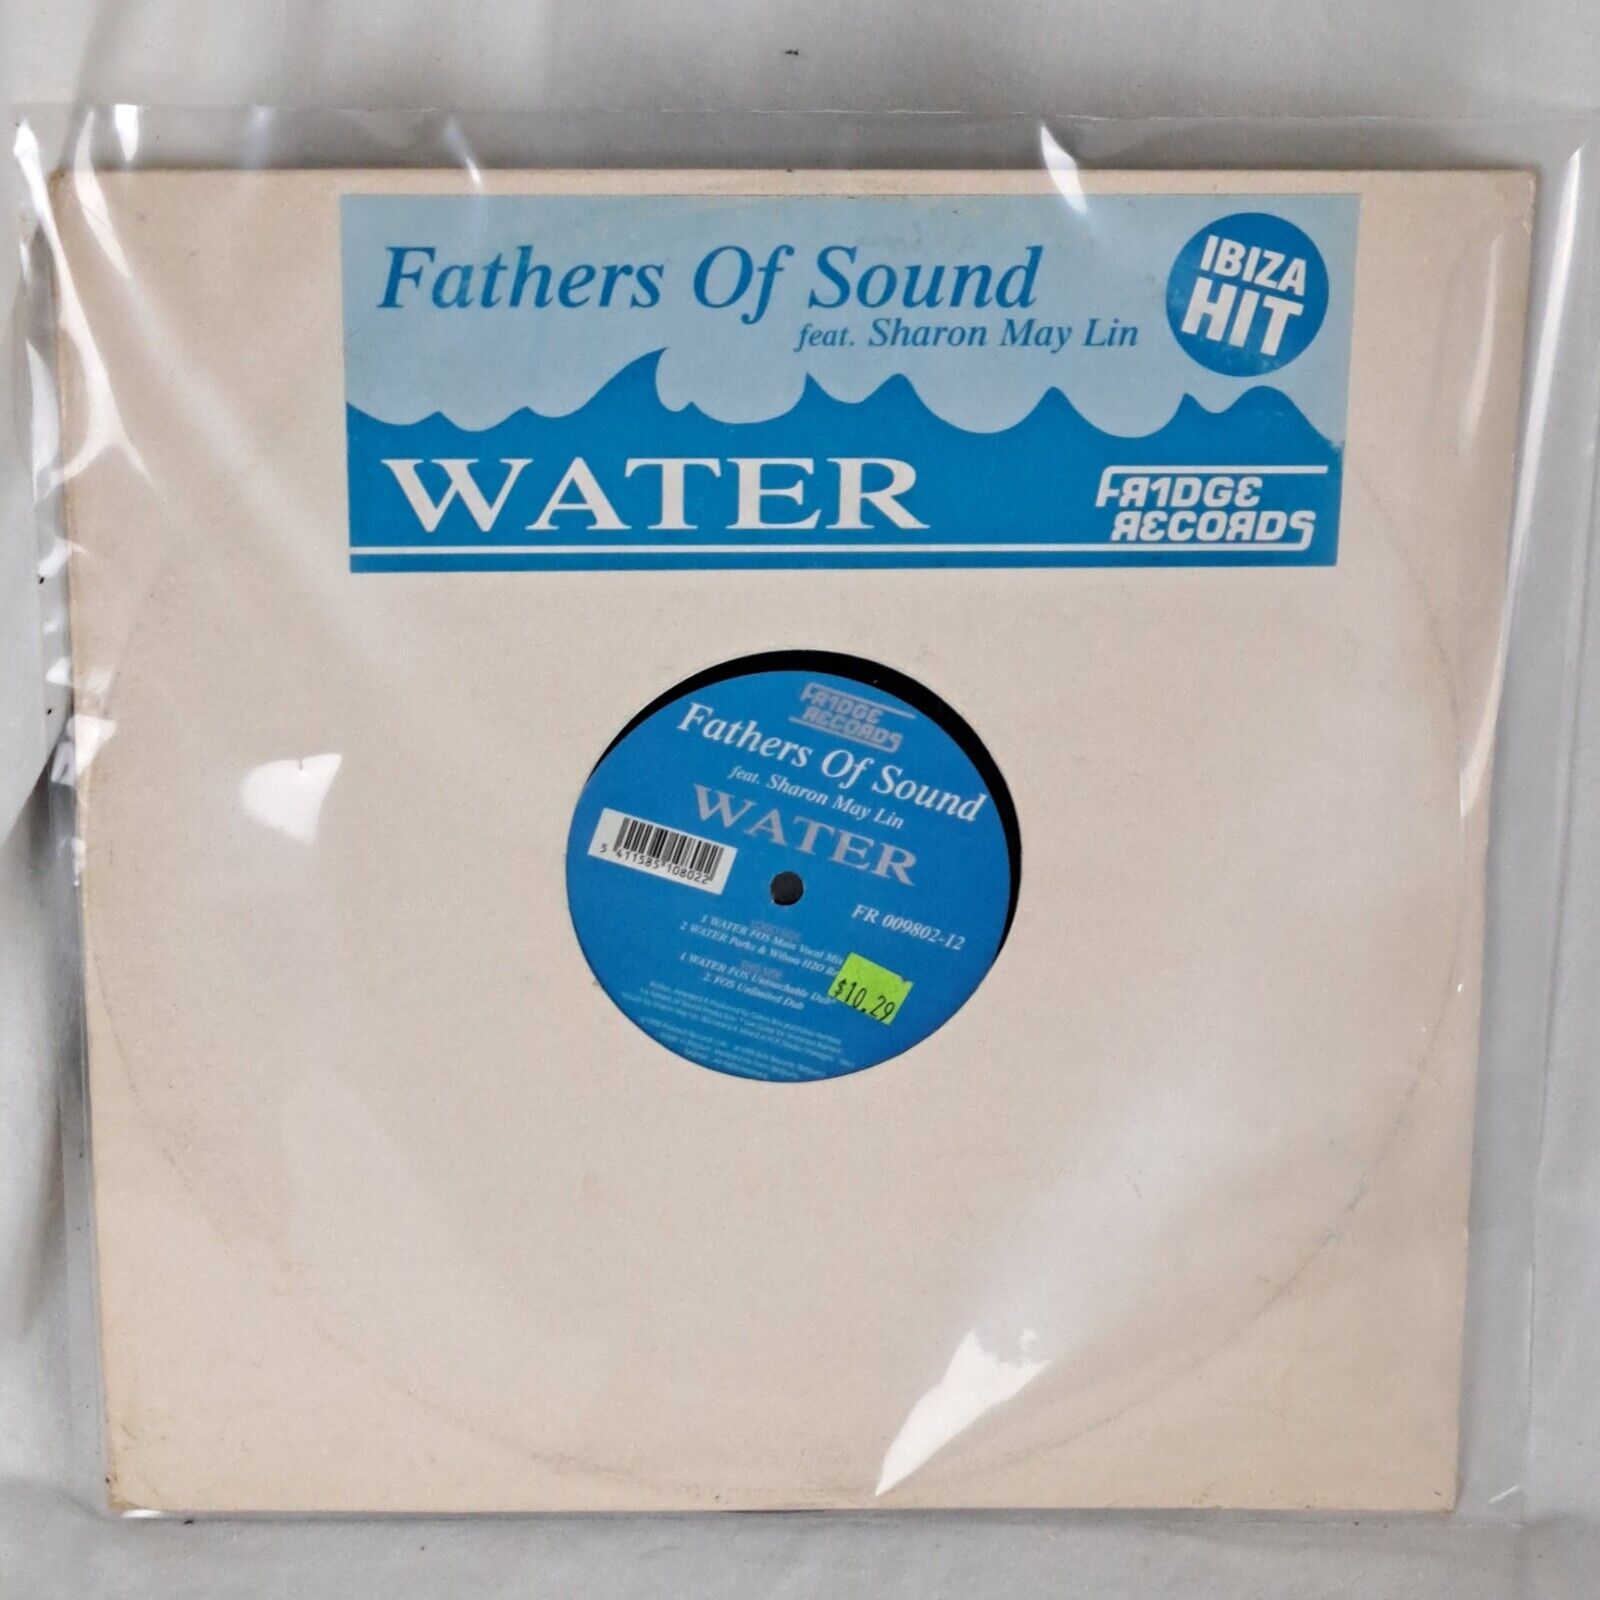 Fathers Of Sound ‘Water’ Vinyl Record, 12” 33 ⅓ RPM, Fridge Records VG Condition